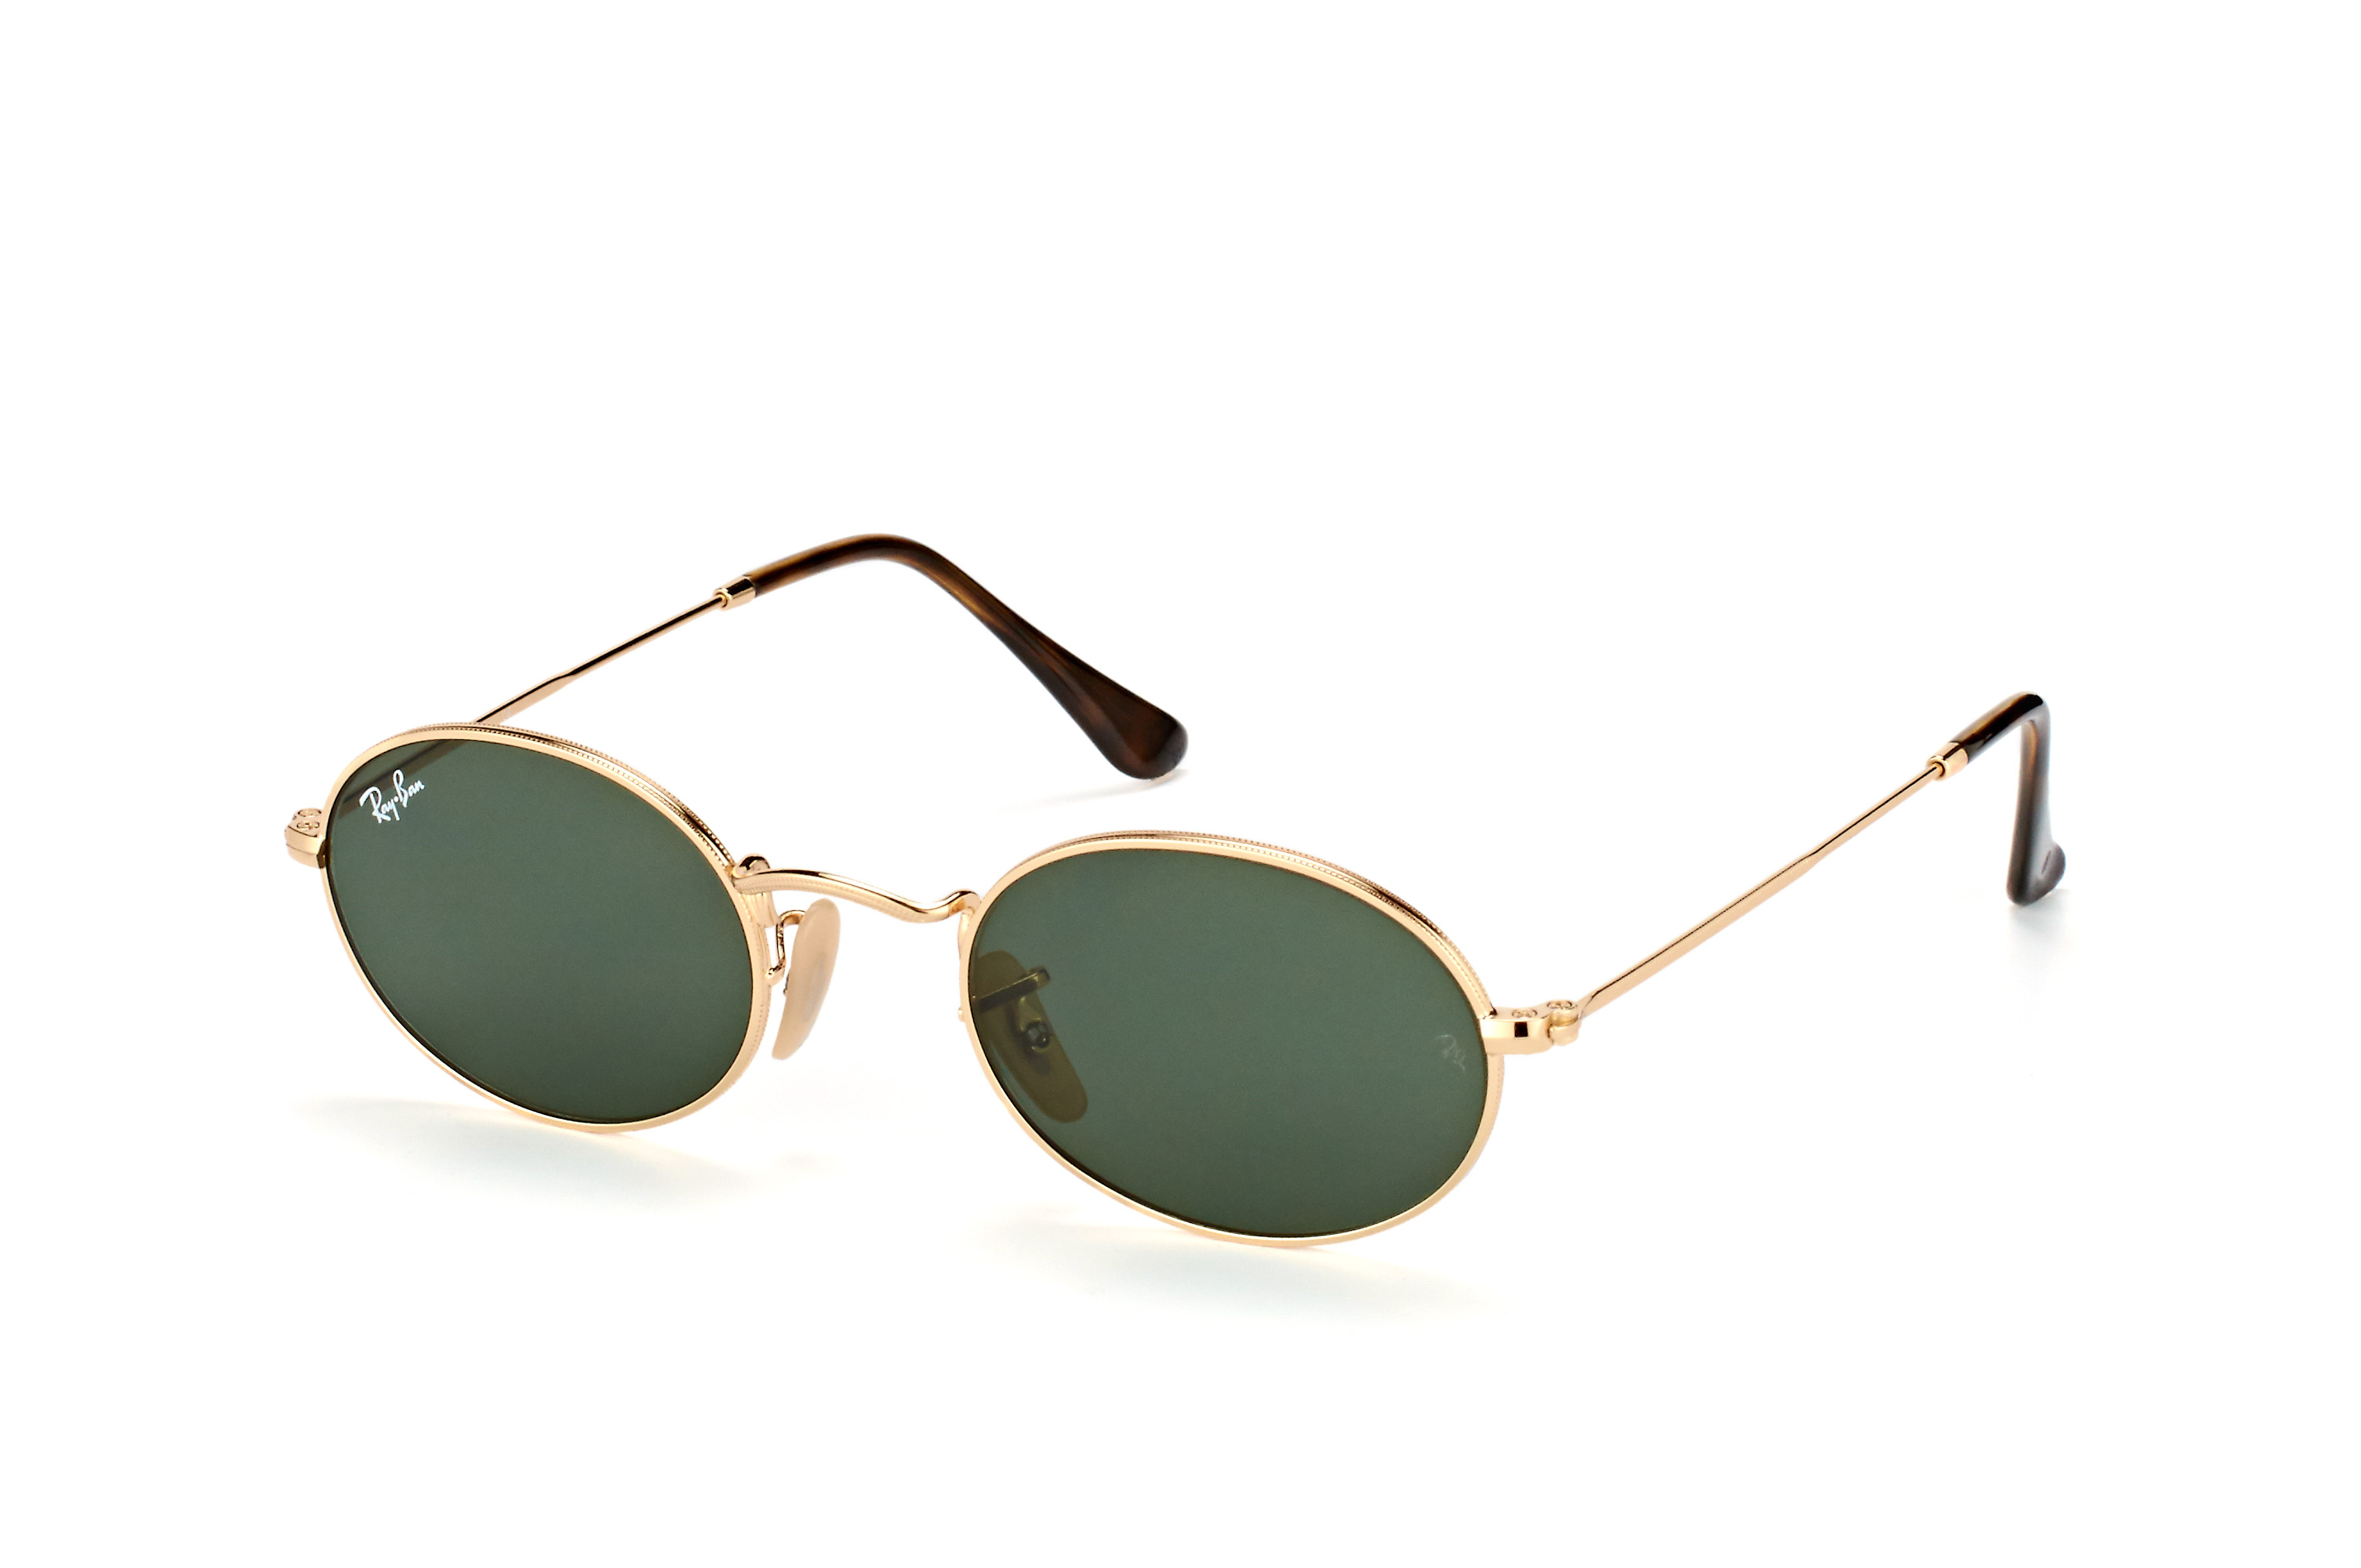 Buy Ray-Ban Oval RB 3547N 001 small Sunglasses